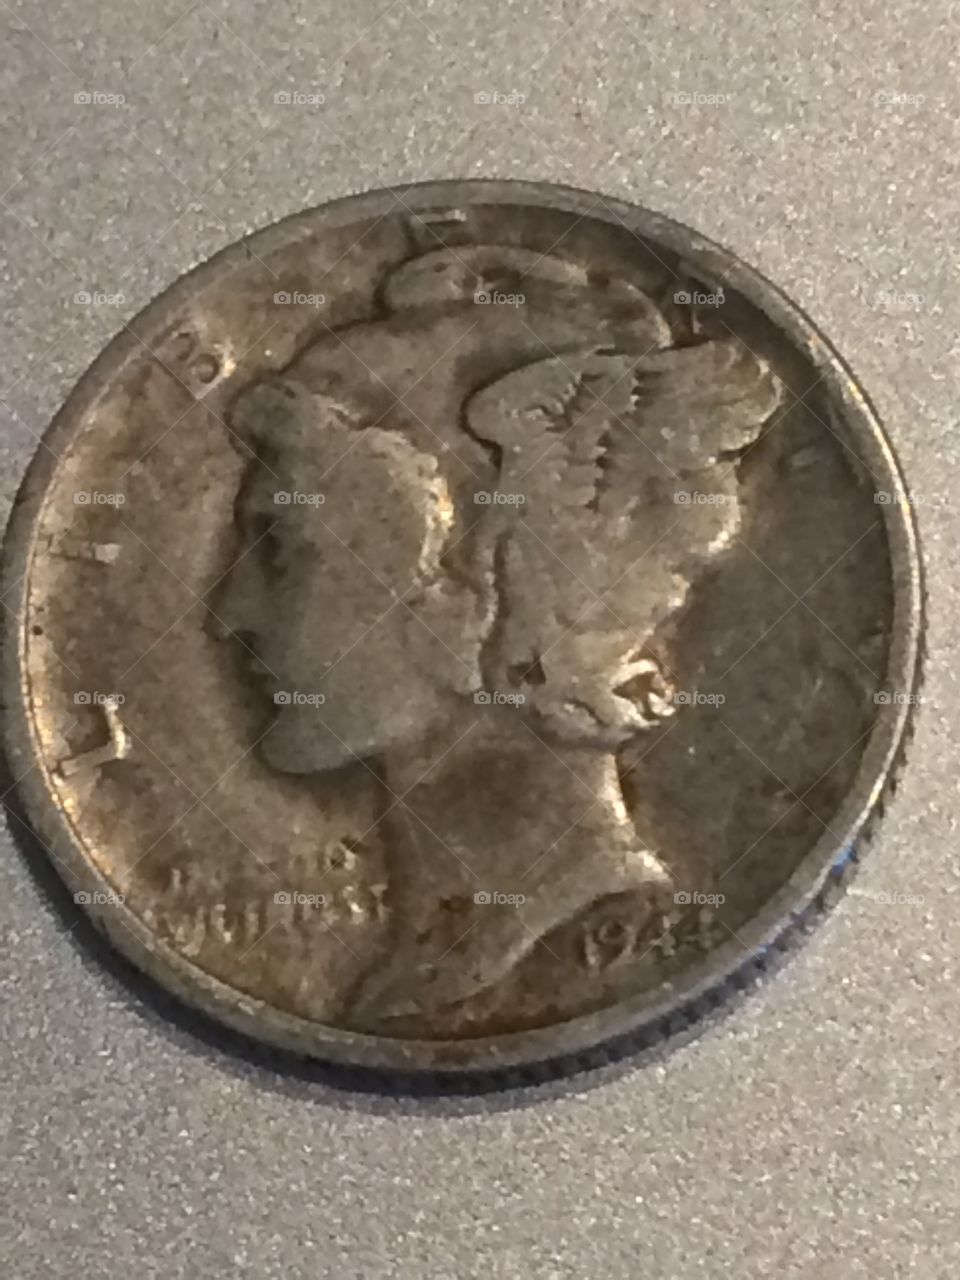 Liberty Head Dime. Found this in my coin collection